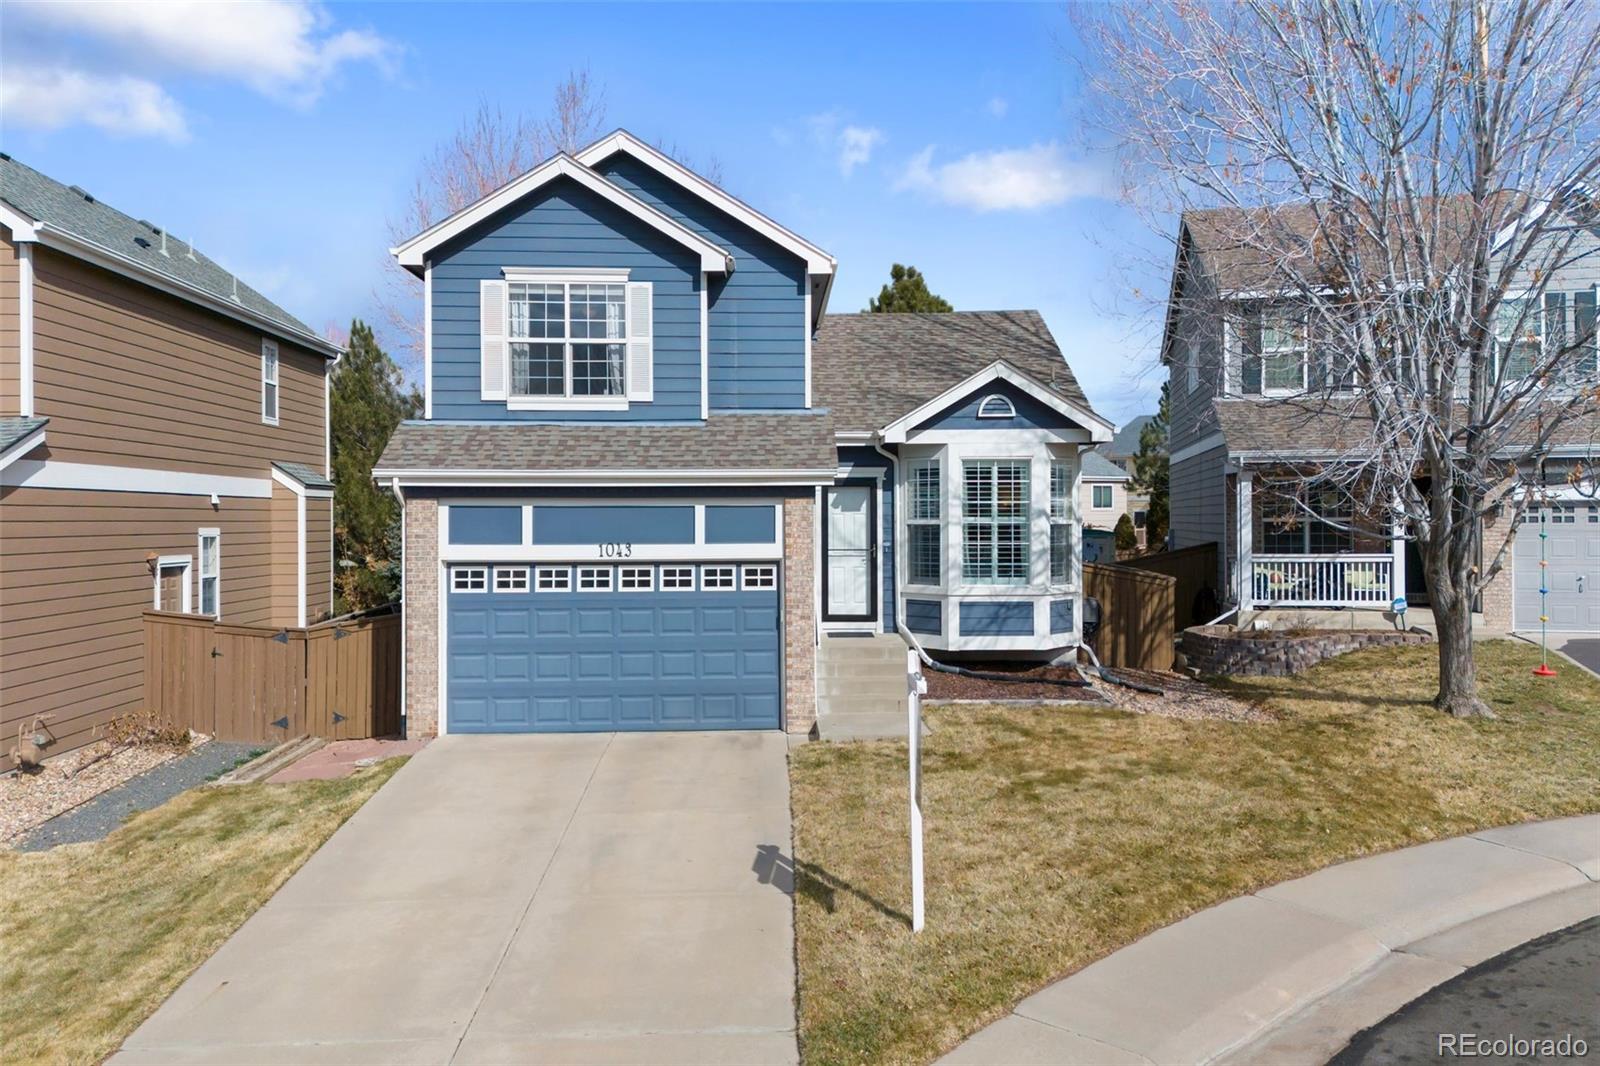 Report Image for 1043  Thornbury Place,Highlands Ranch, Colorado